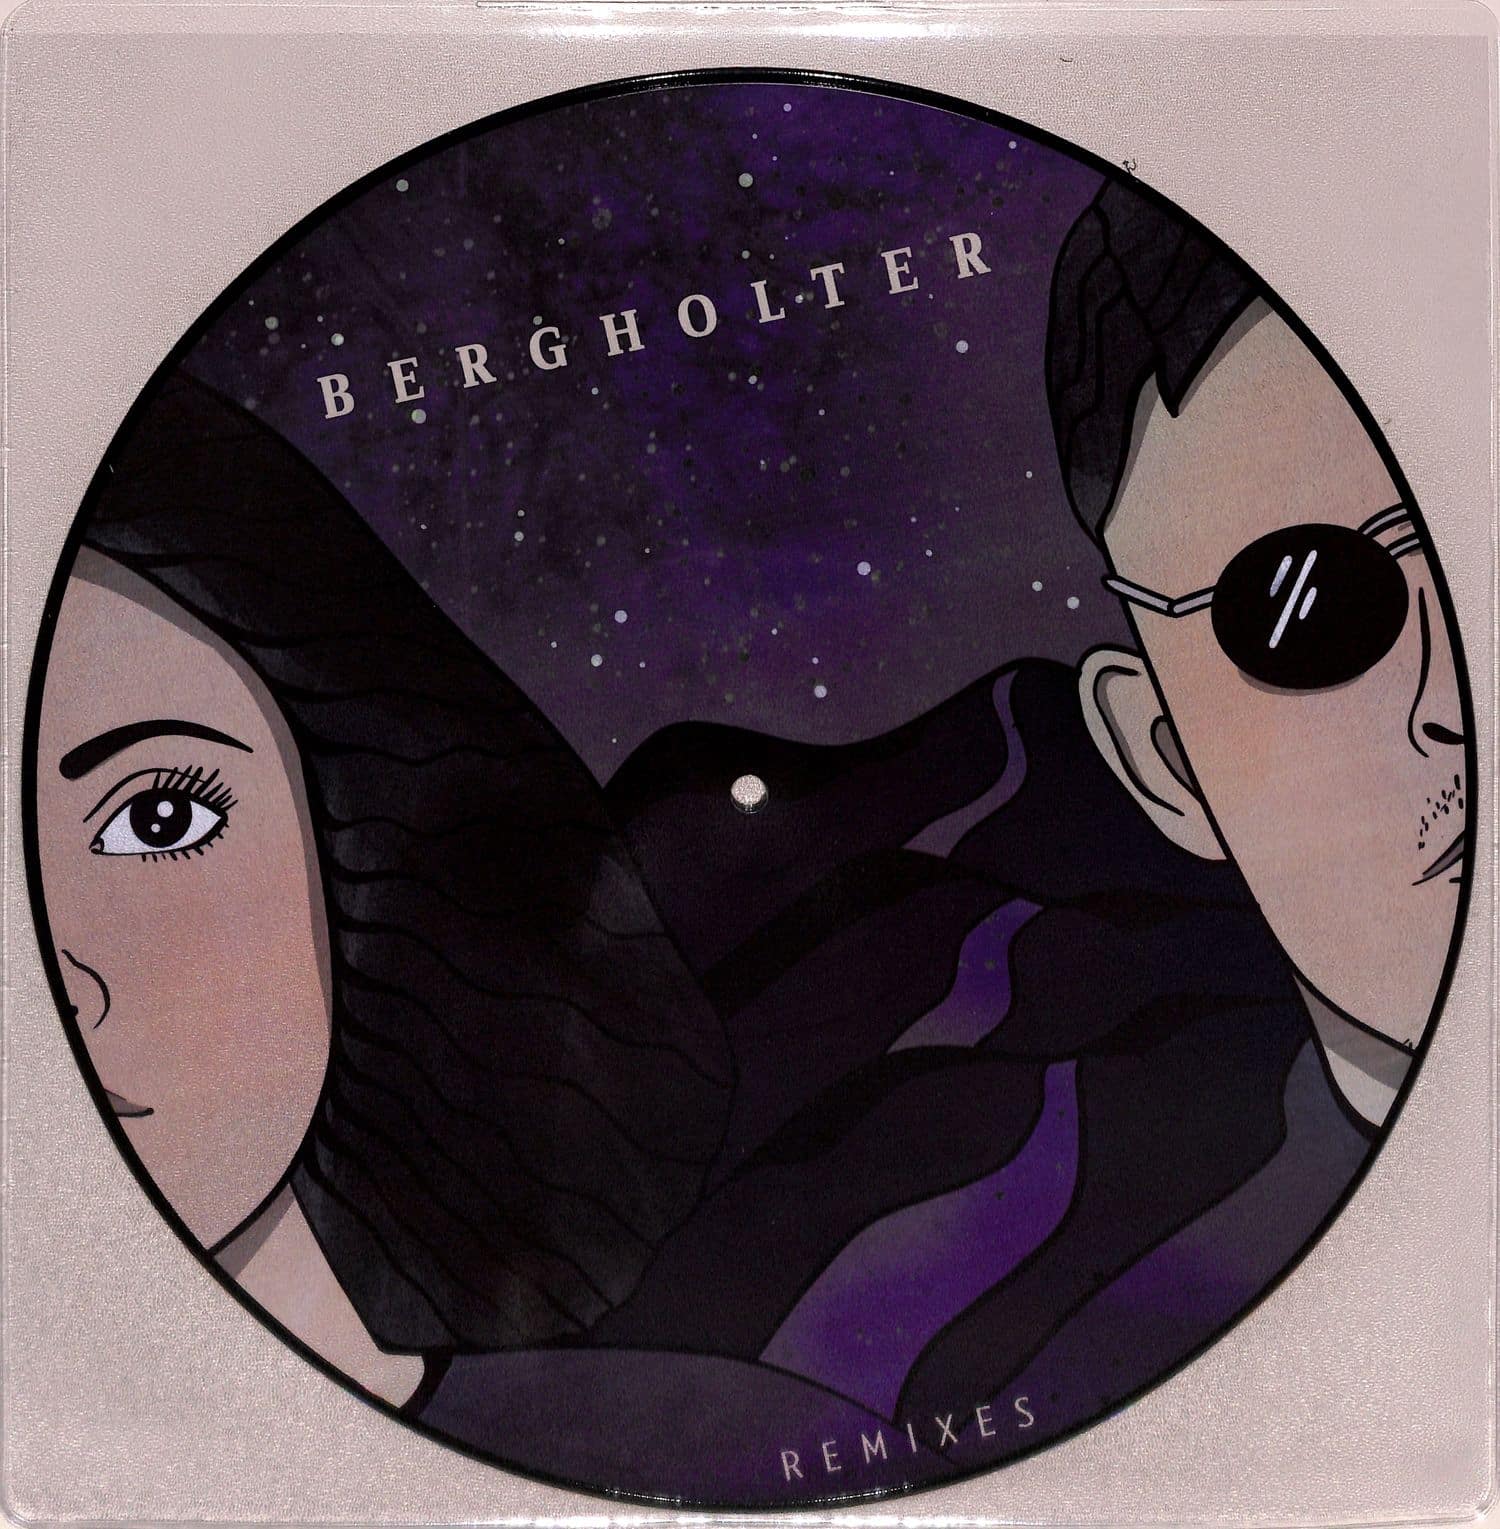 Bergholter - LIPS DONT CRY RMXS 